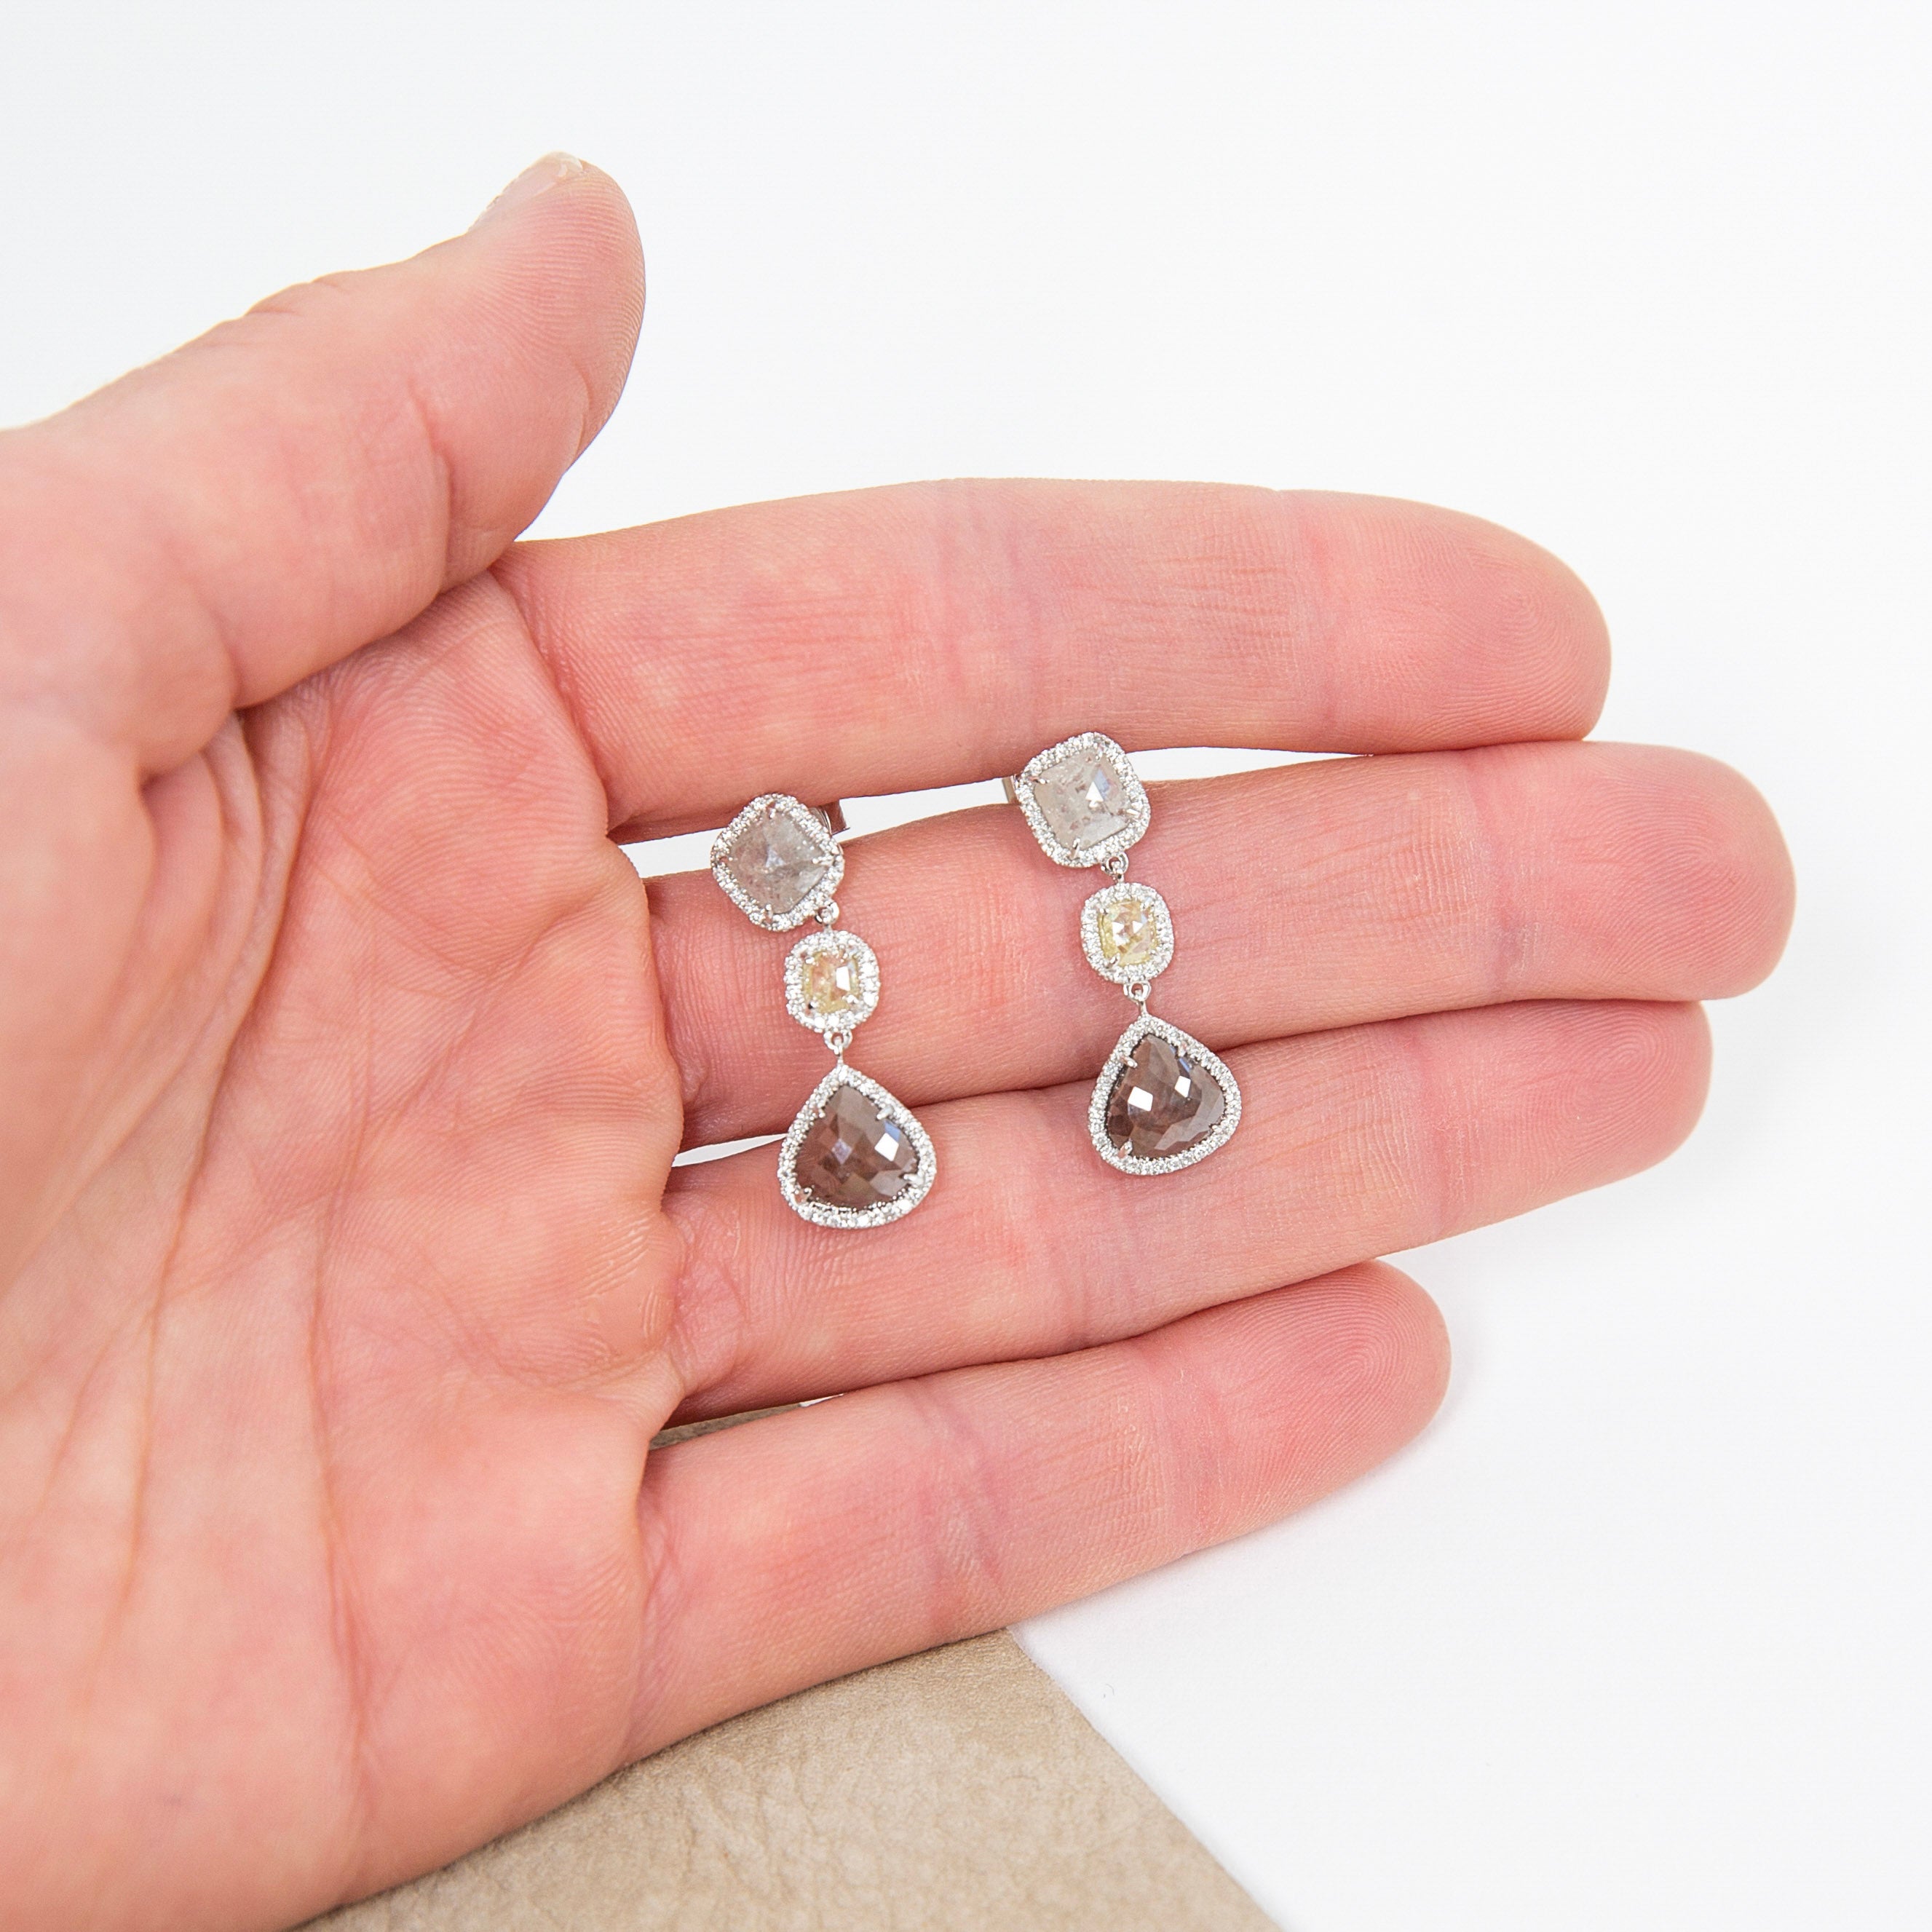 Liven Co <br> One of a kind White Gold Diamond Earrings